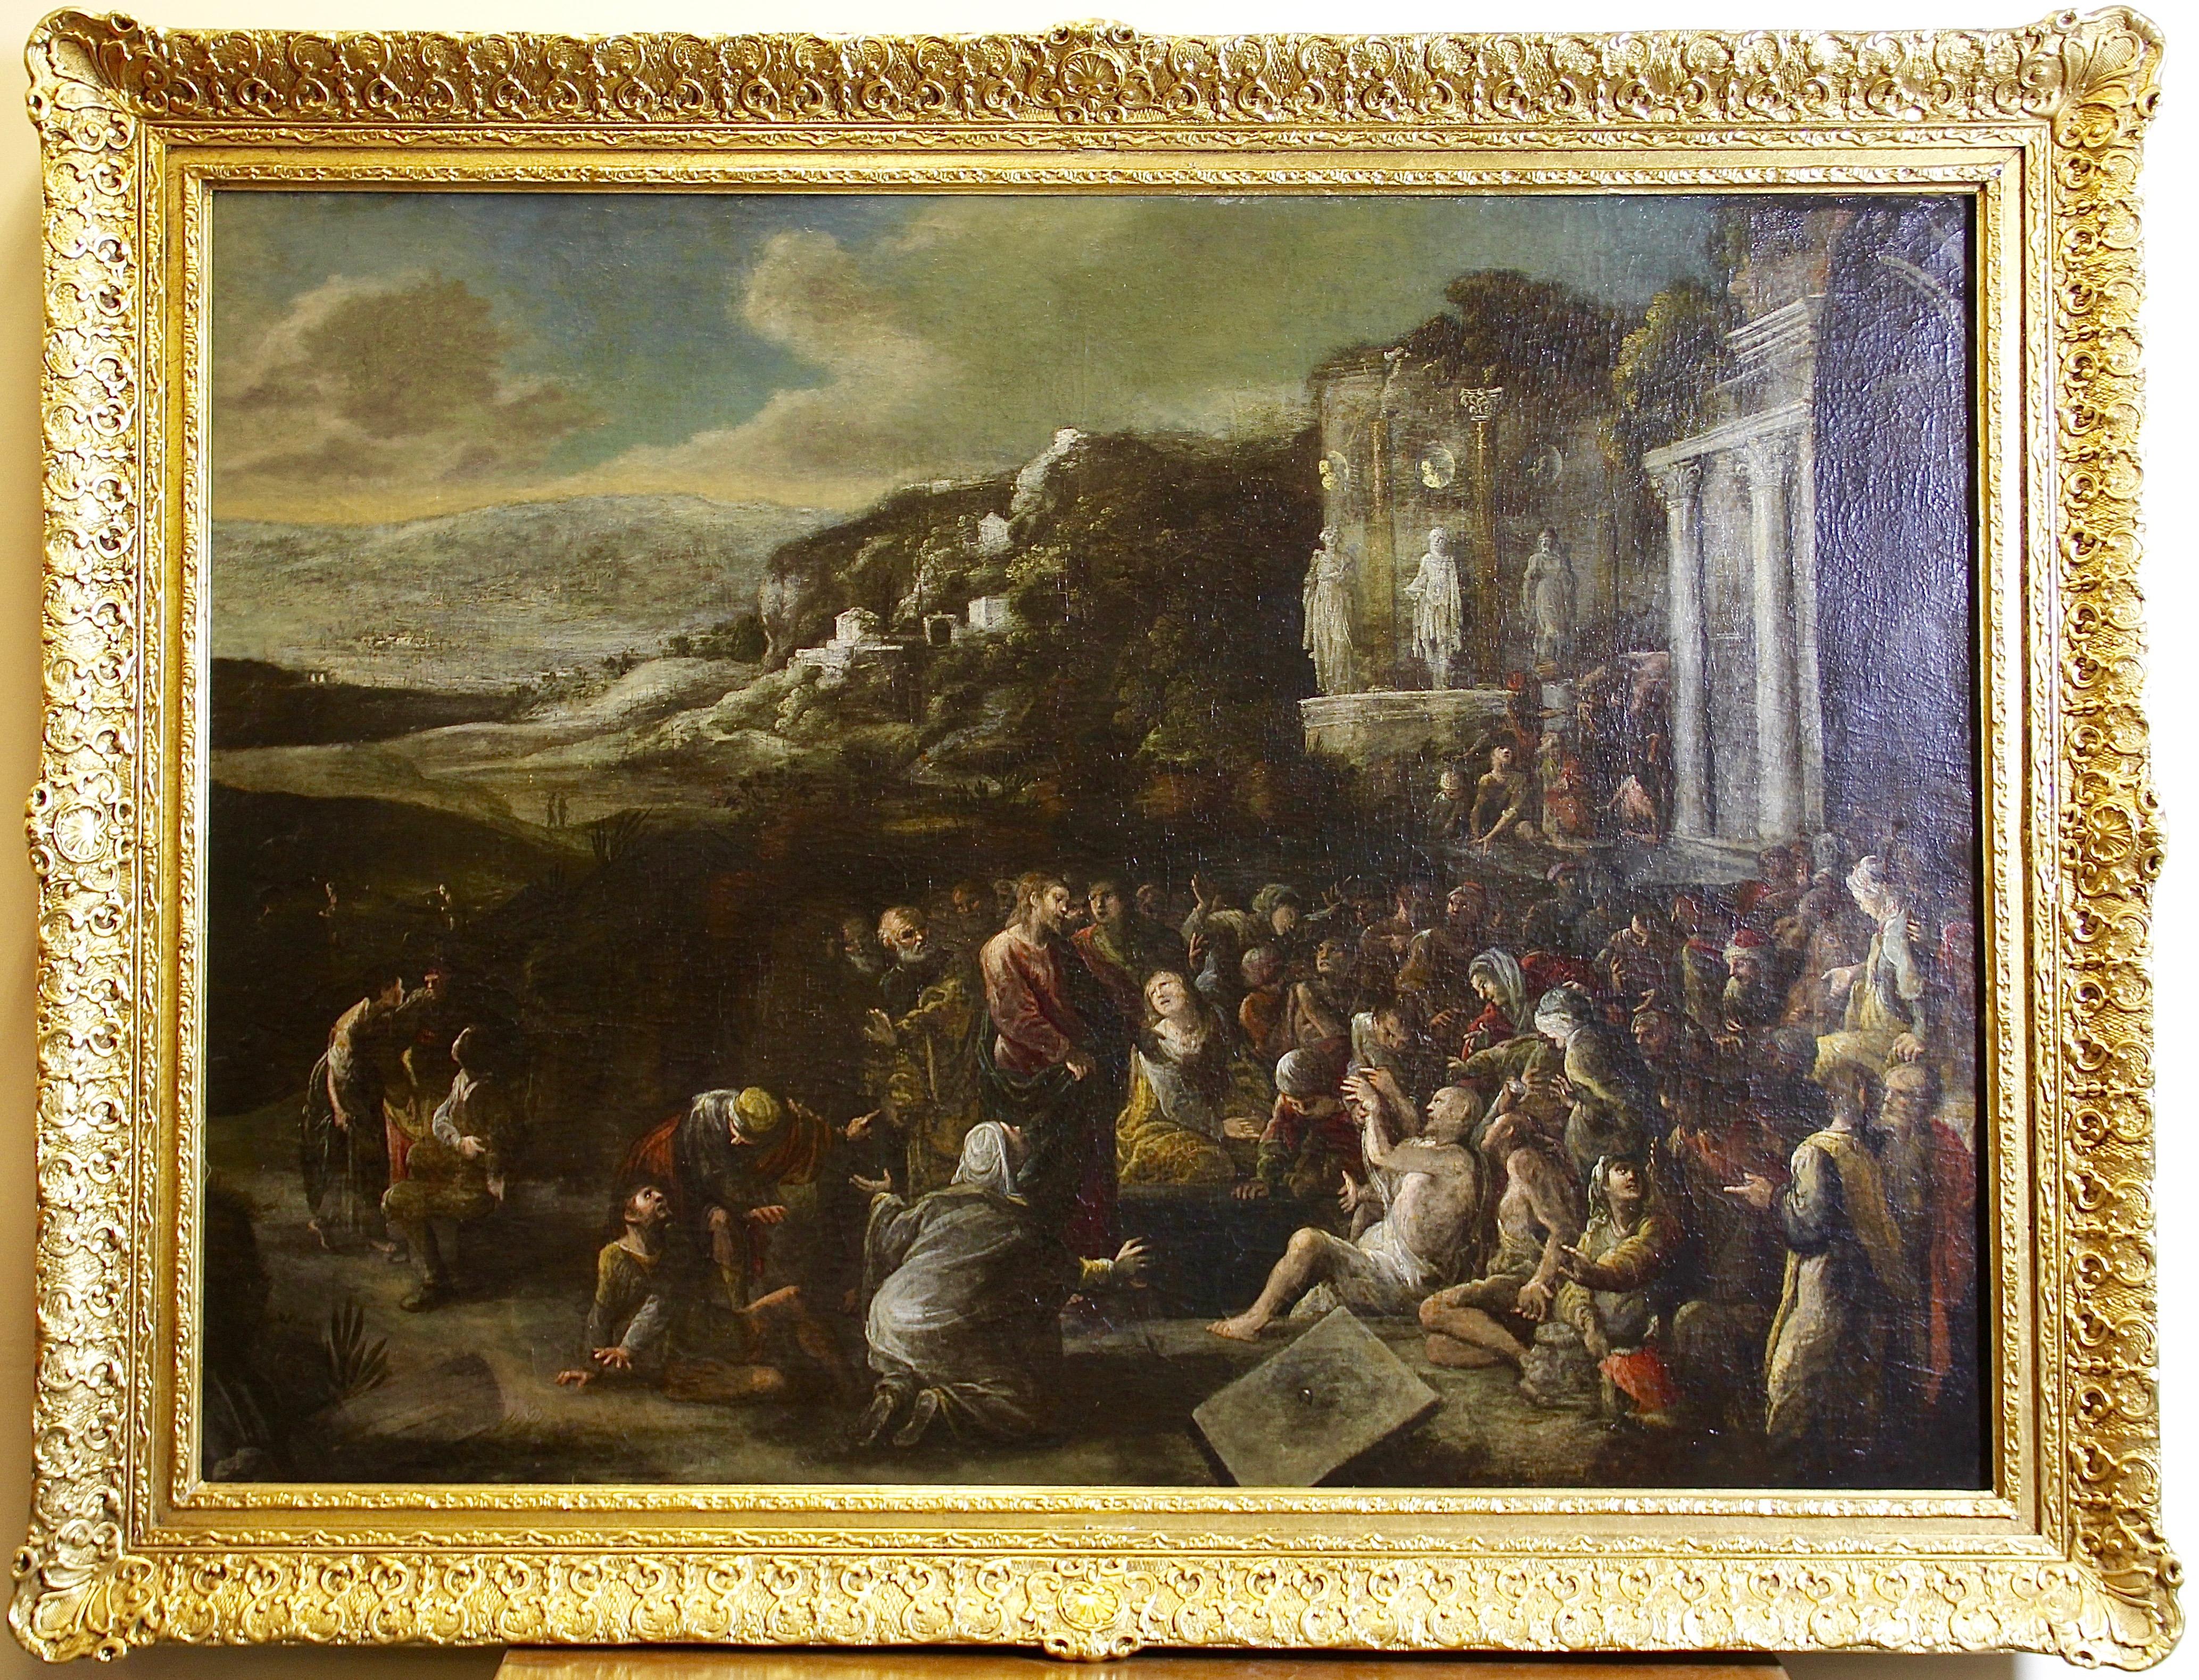 Antique, decorative oil painting, 18th century. Christian scene. - Painting by Unknown